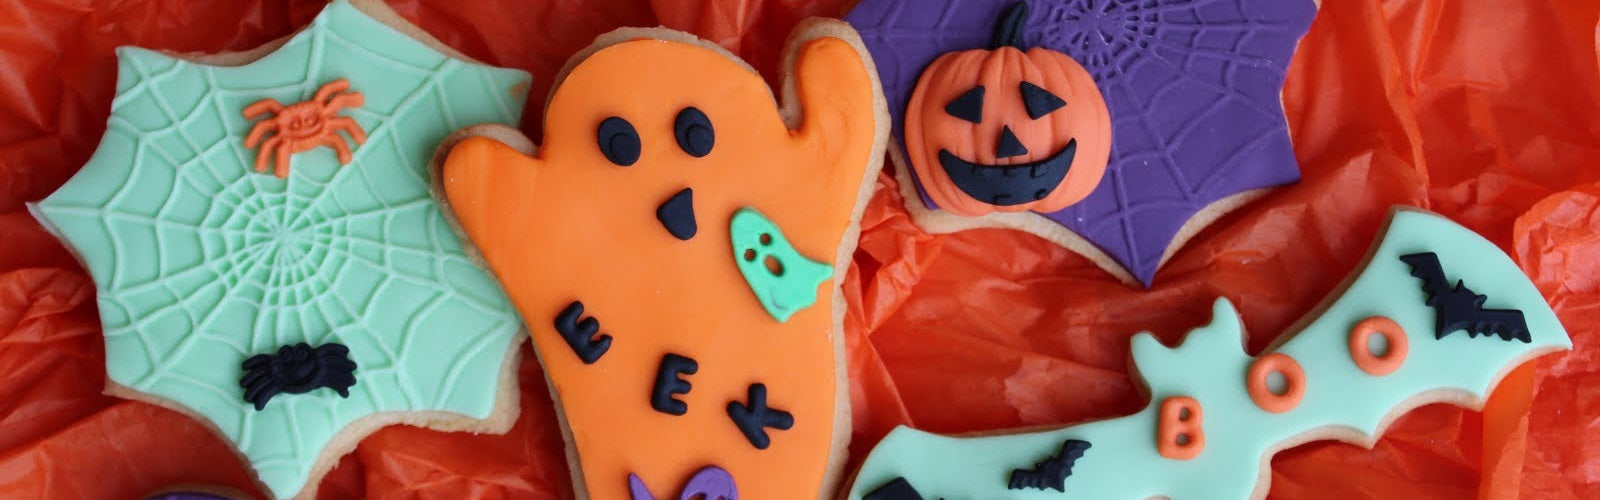 Spooky Cookies by The Cupcake Oven